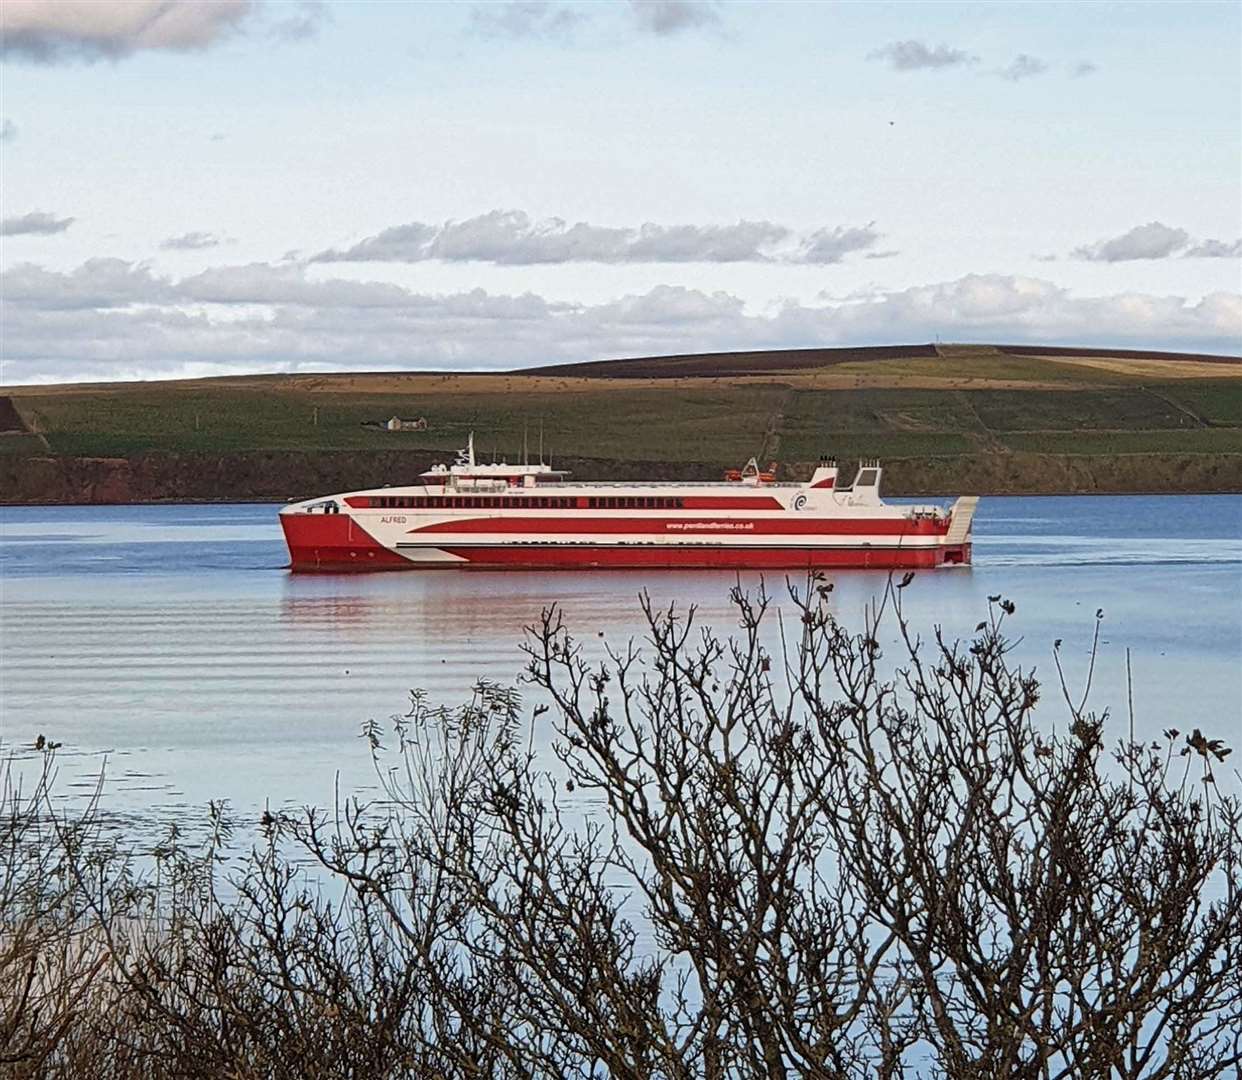 MV Alfred replaced the Pentalina on the Pentland Firth route in 2019. Picture: Louise Berston